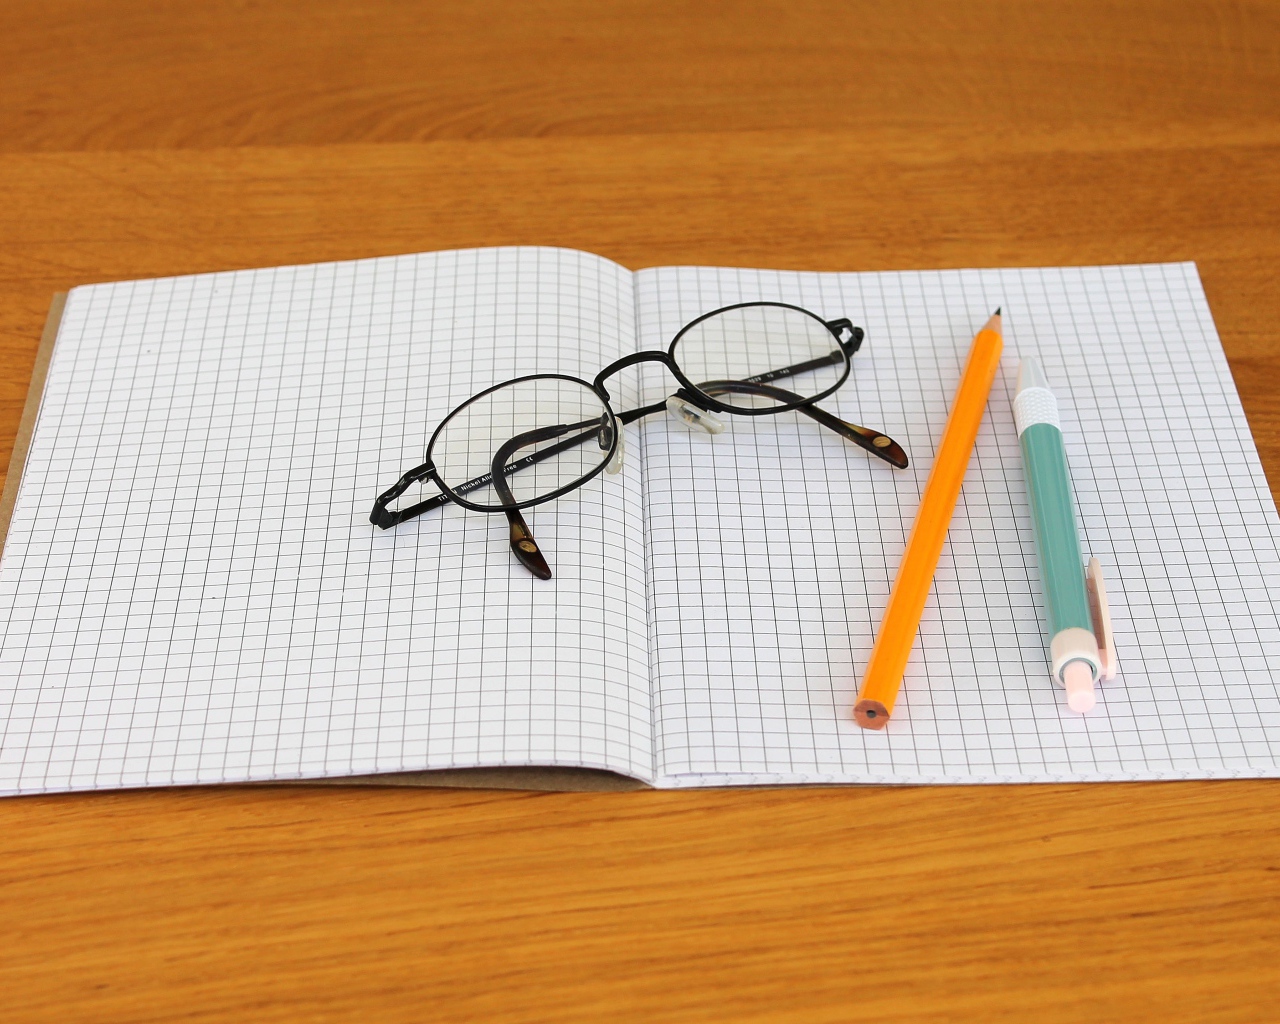 Notebook, pen, pencil and glasses are on the desk